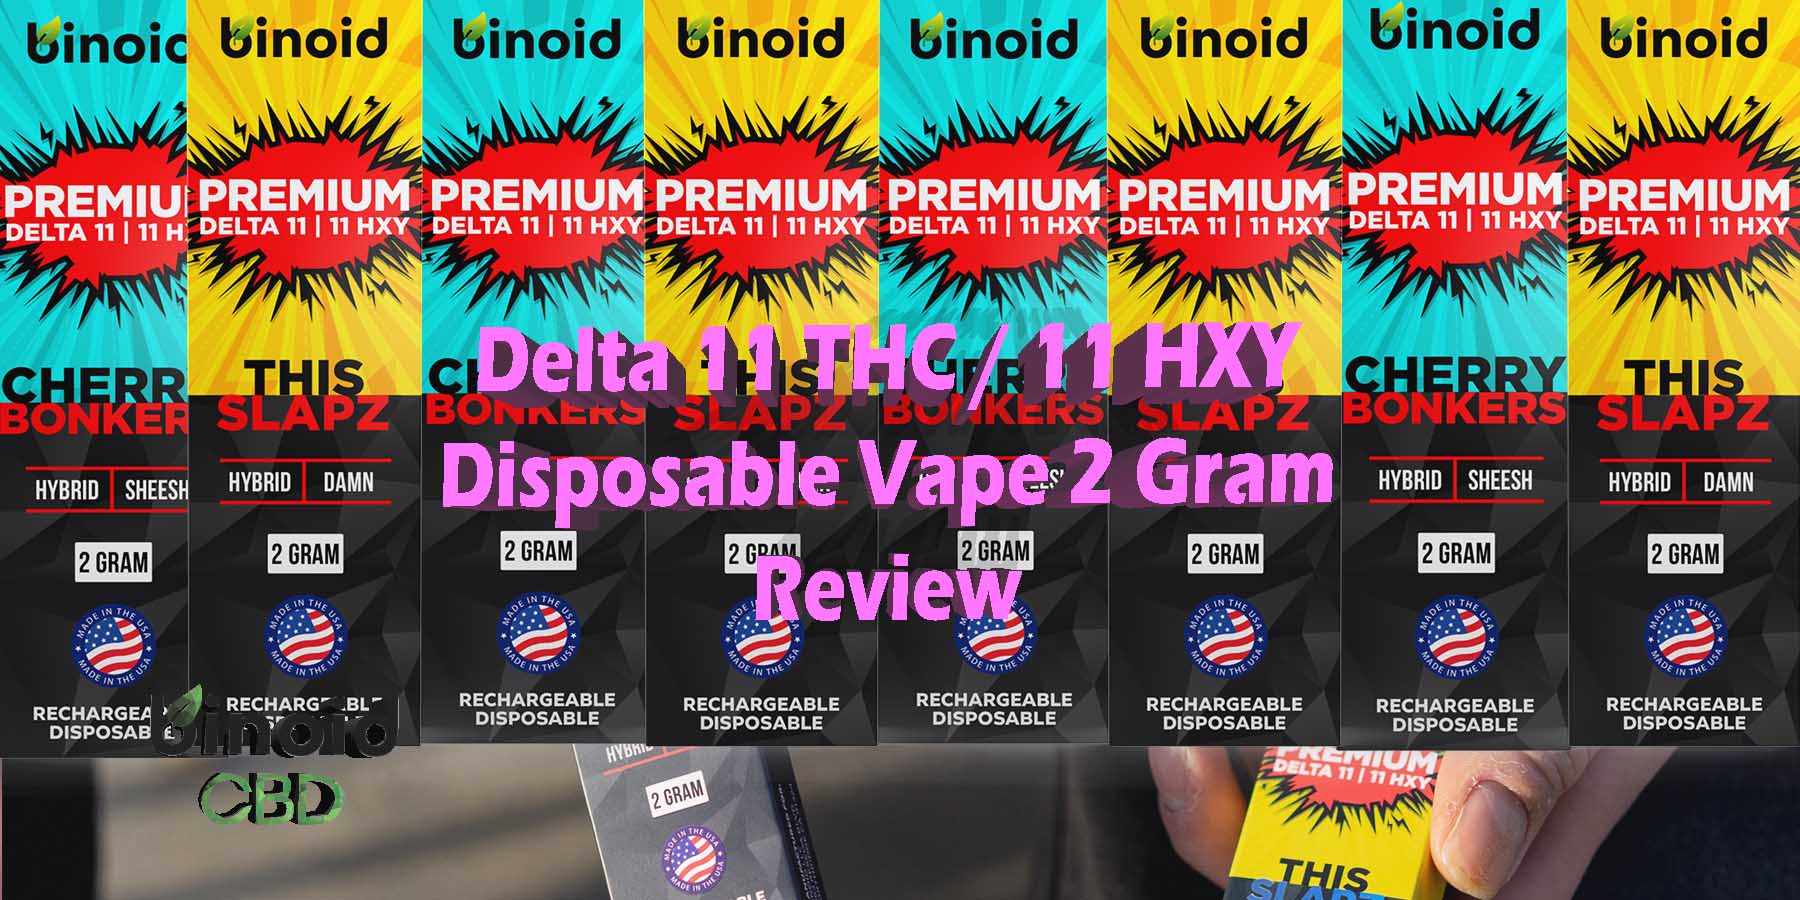 Delta 11 THC 11 HXY Disposable Vape 2 Gram Review Gram Review Take Work Online Best Brand Price Get Near Me Lowest Coupon Discount Store Shop Vapes Carts Online Strong